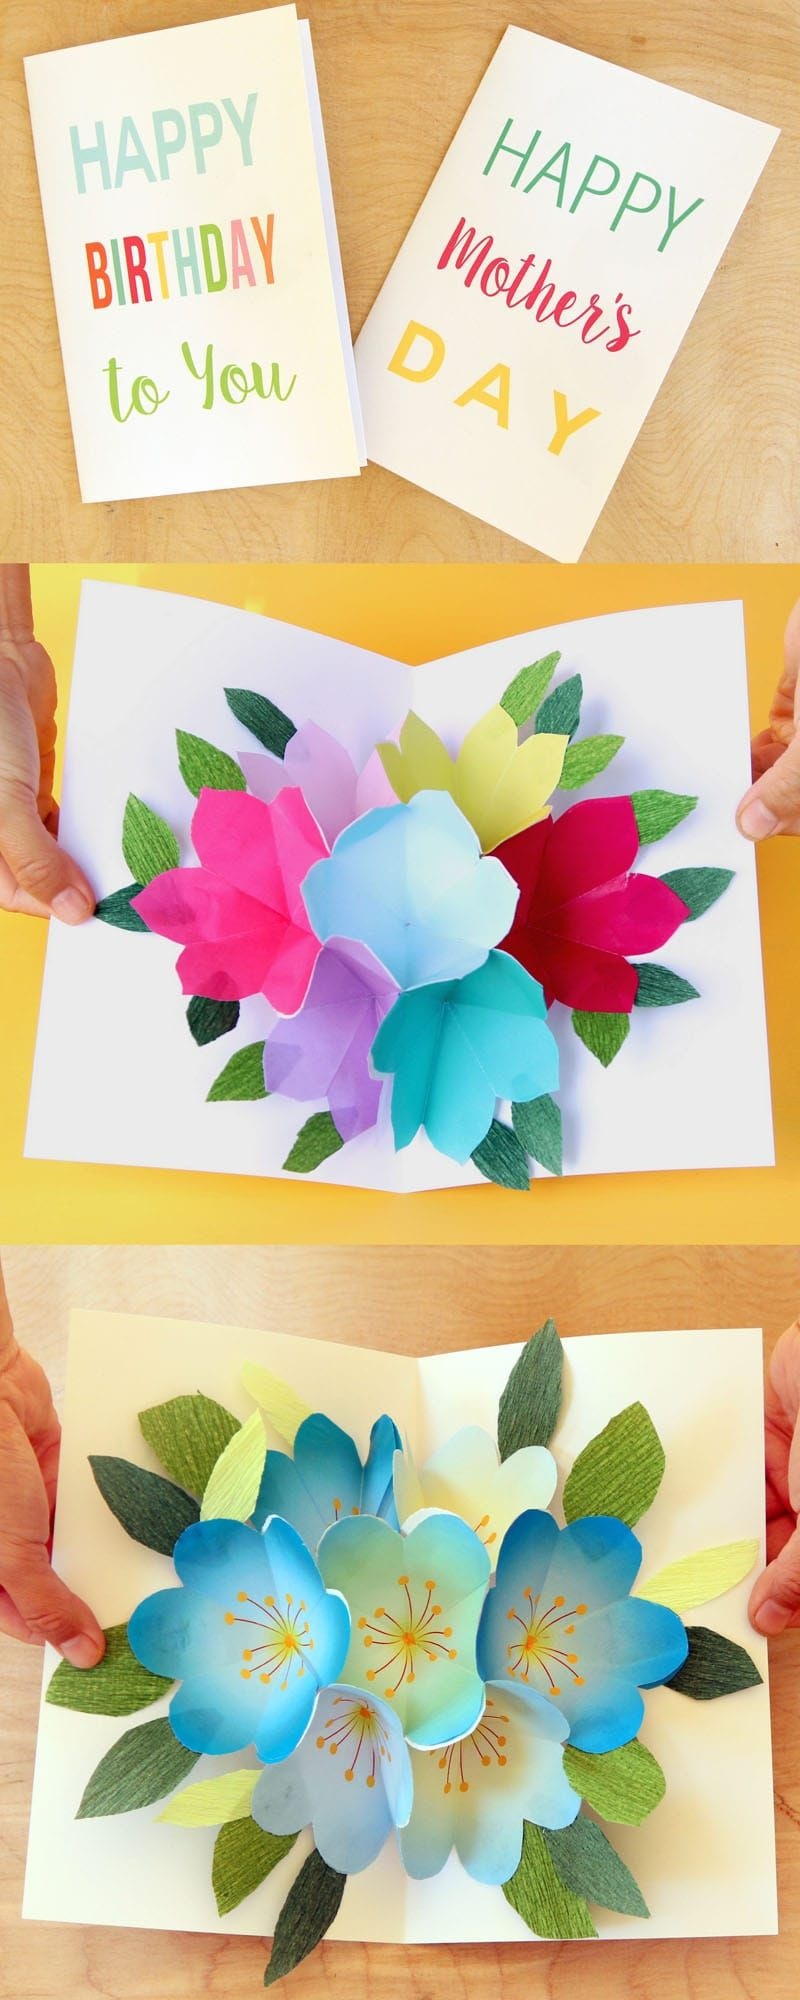 Free Printable Happy Birthday Card With Pop Up Bouquet | Printables - Free Printable Birthday Cards For Mom